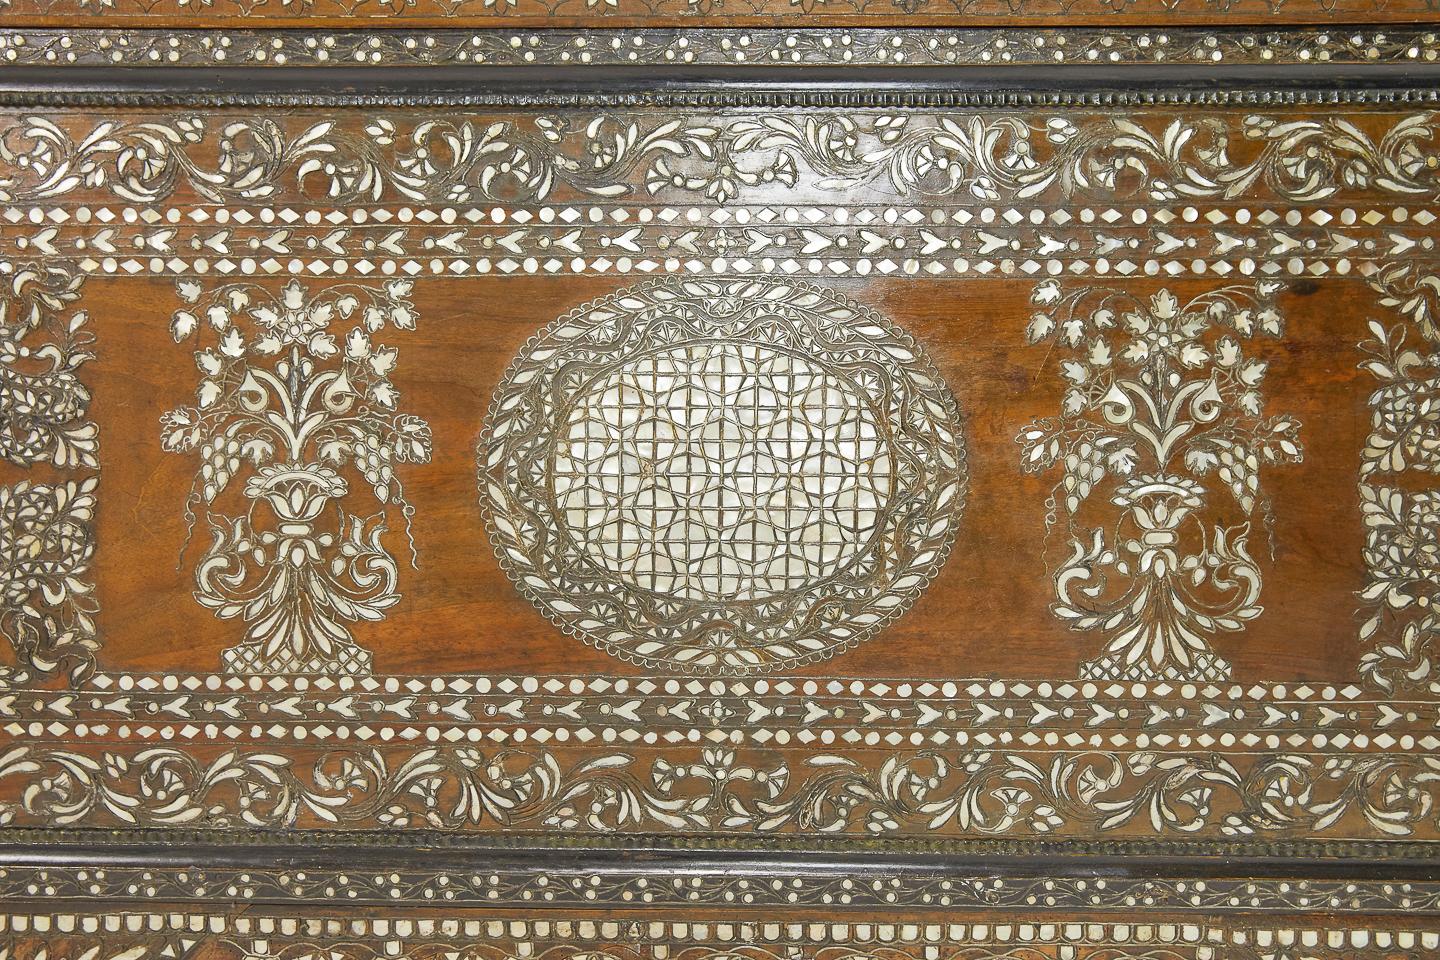 Grand Scale 19th Century Syrian Wedding Chest For Sale 6